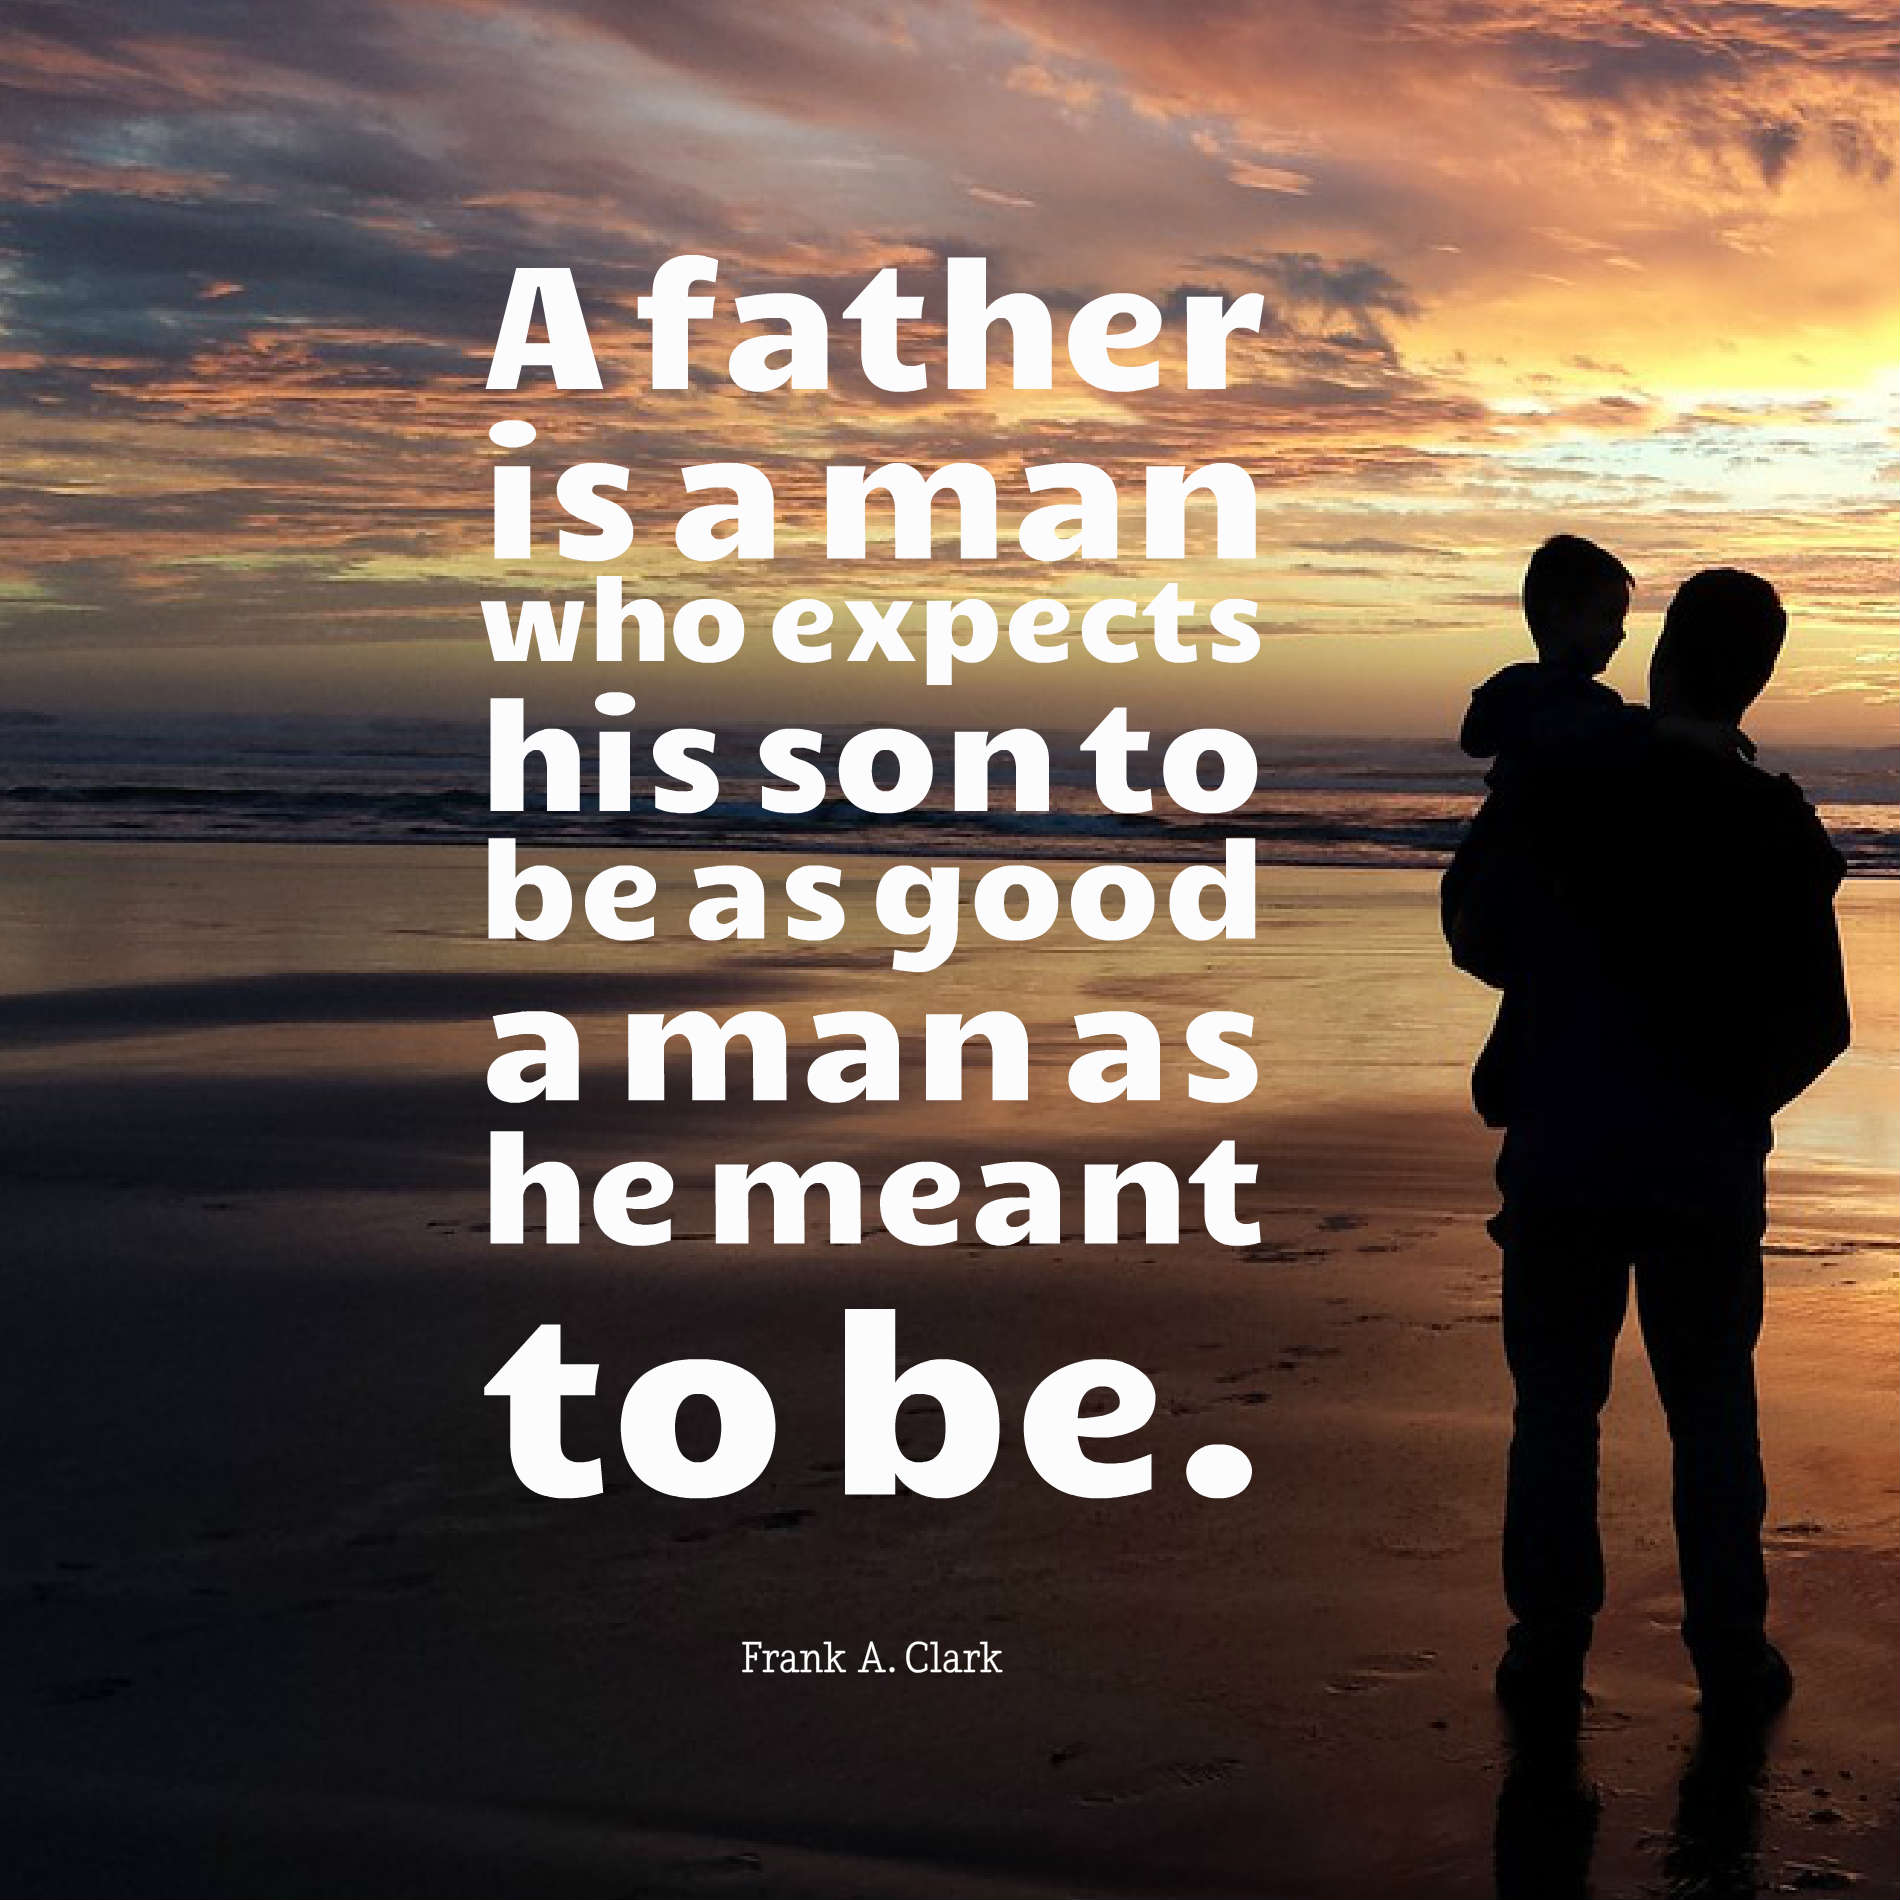 What is a meaningful quote about Dad?